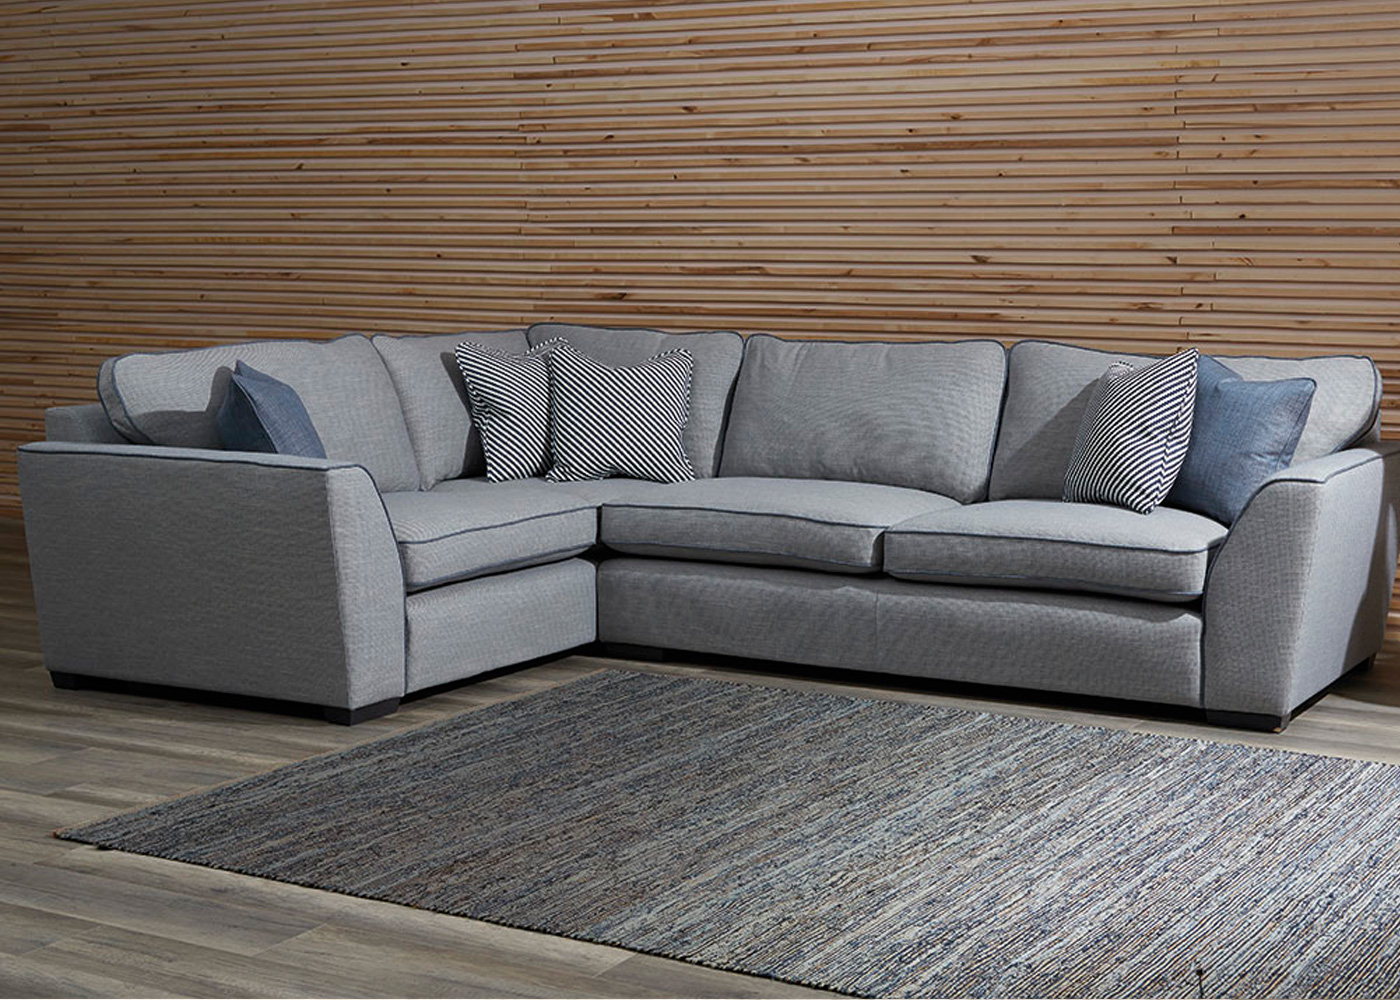 Collins and hayes sofa